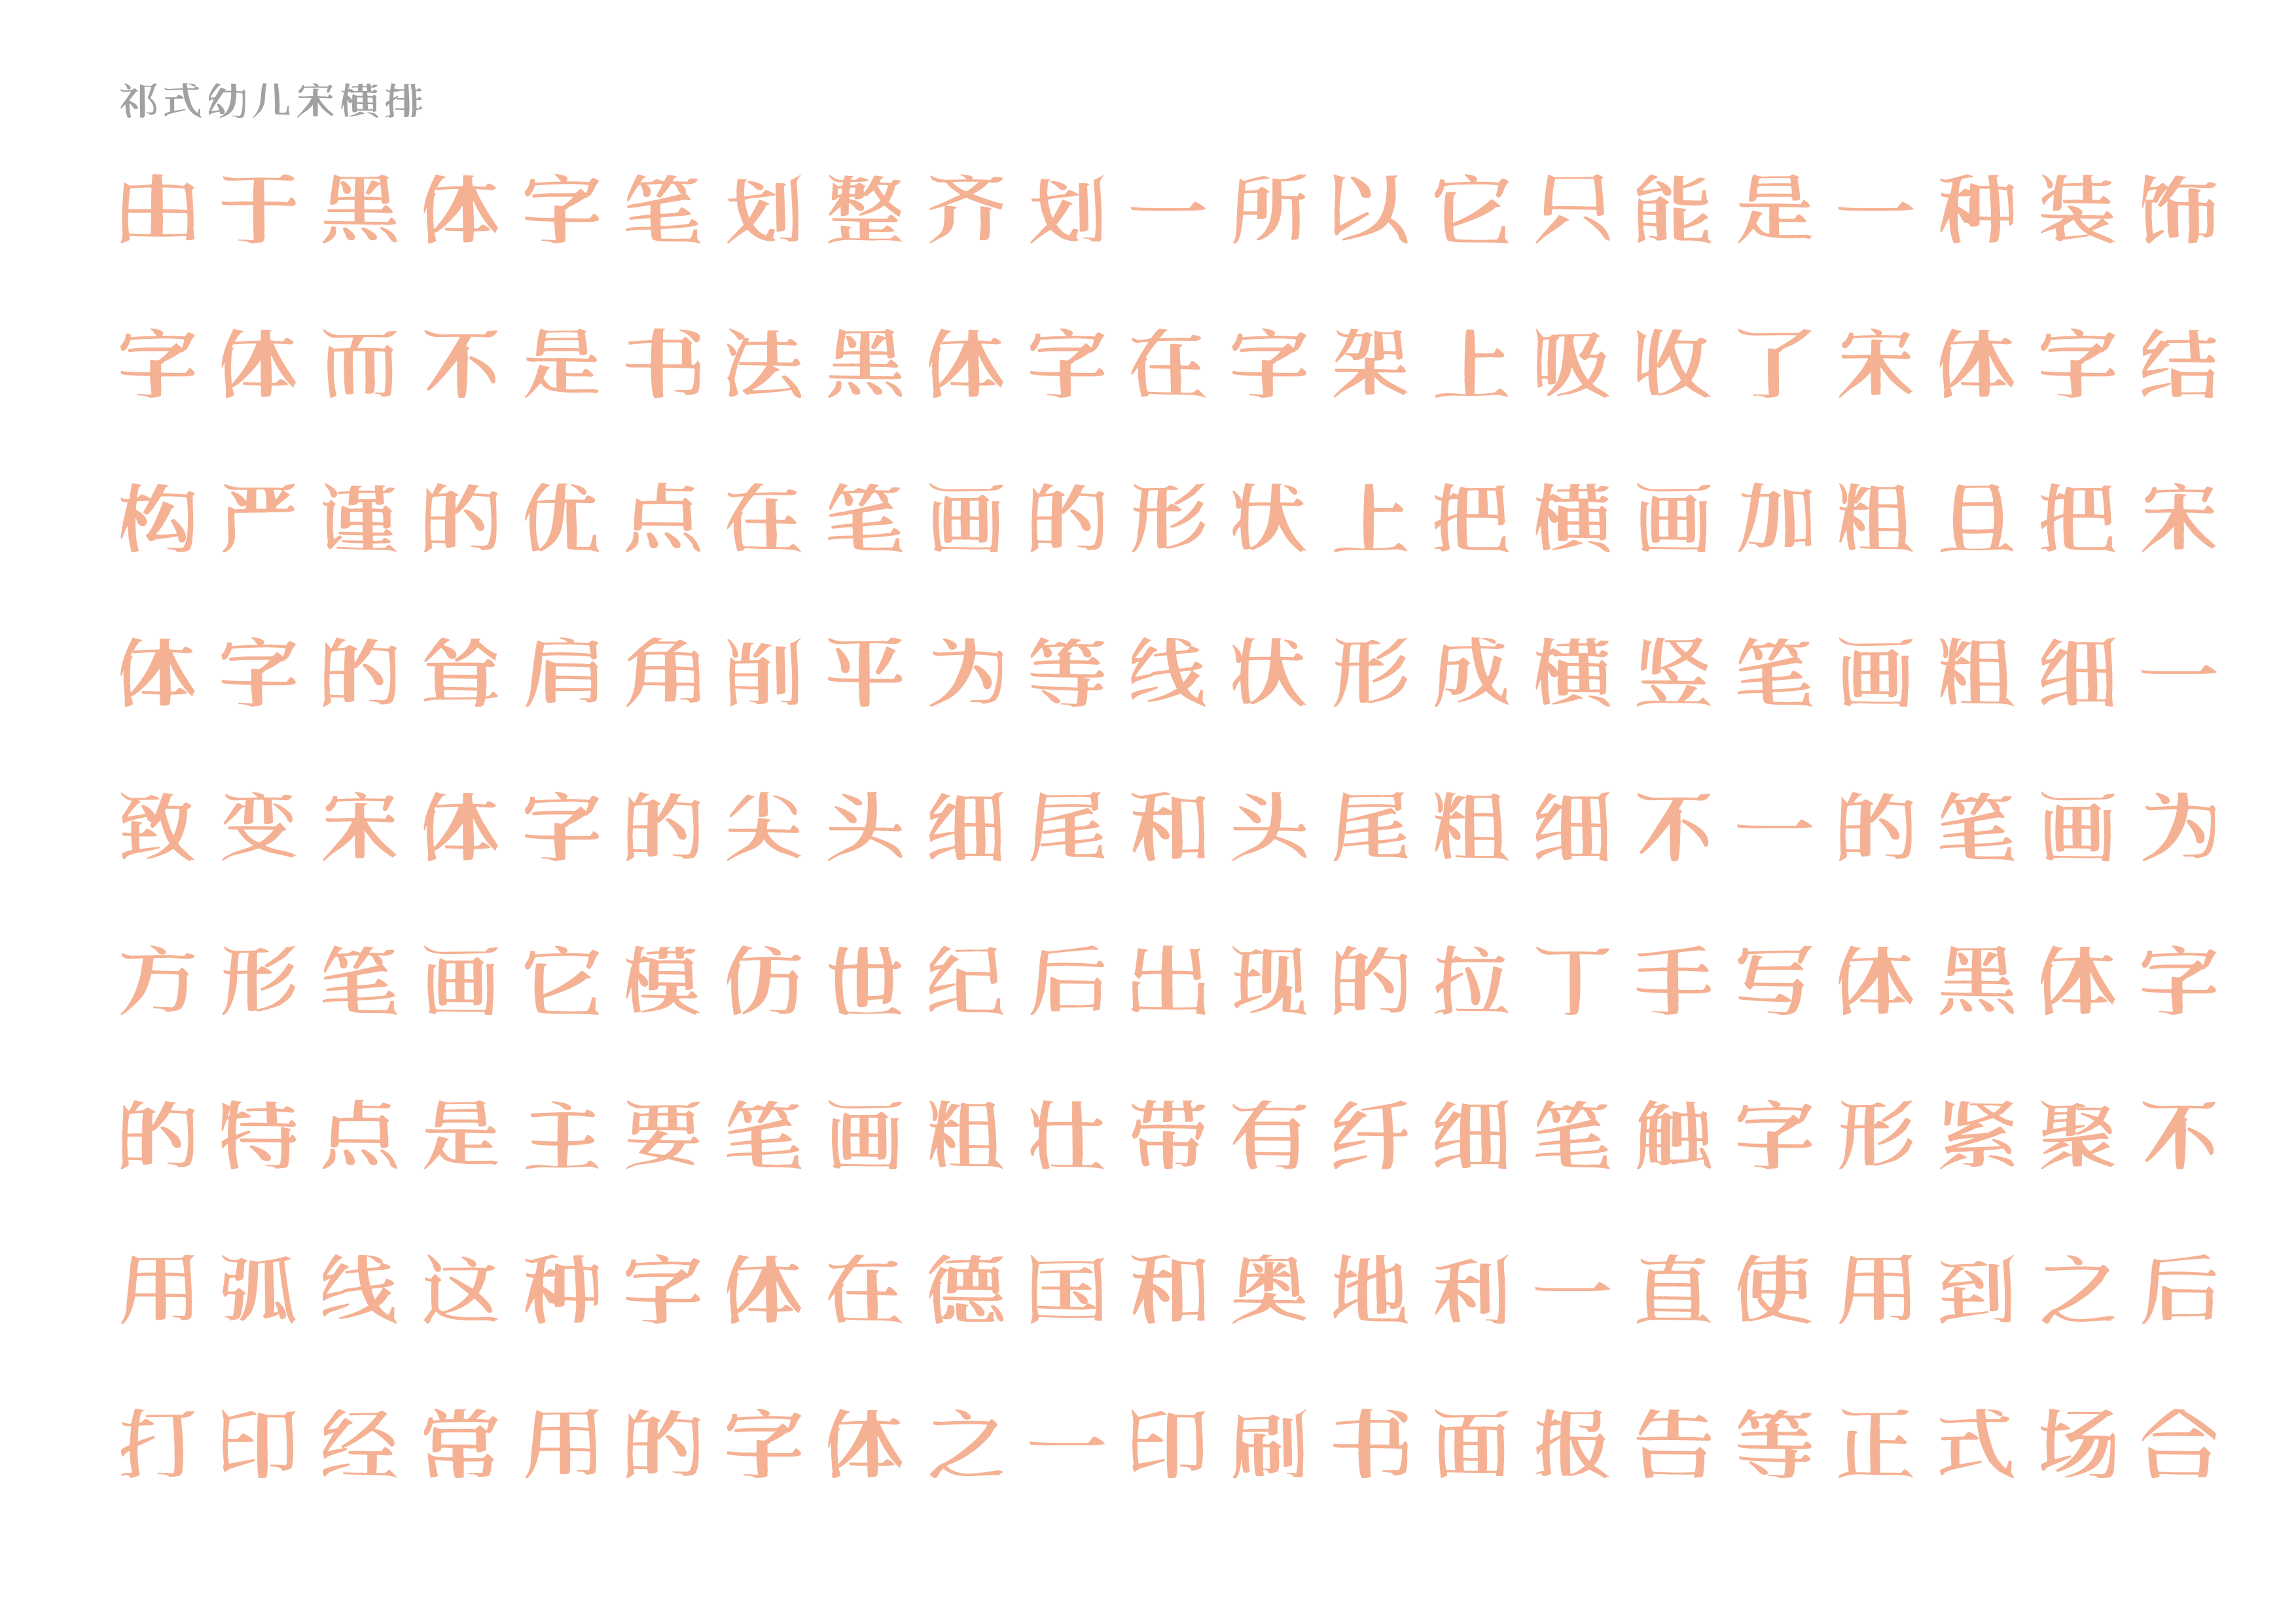 88P Collection of the latest Chinese font design schemes in 2021 #.70